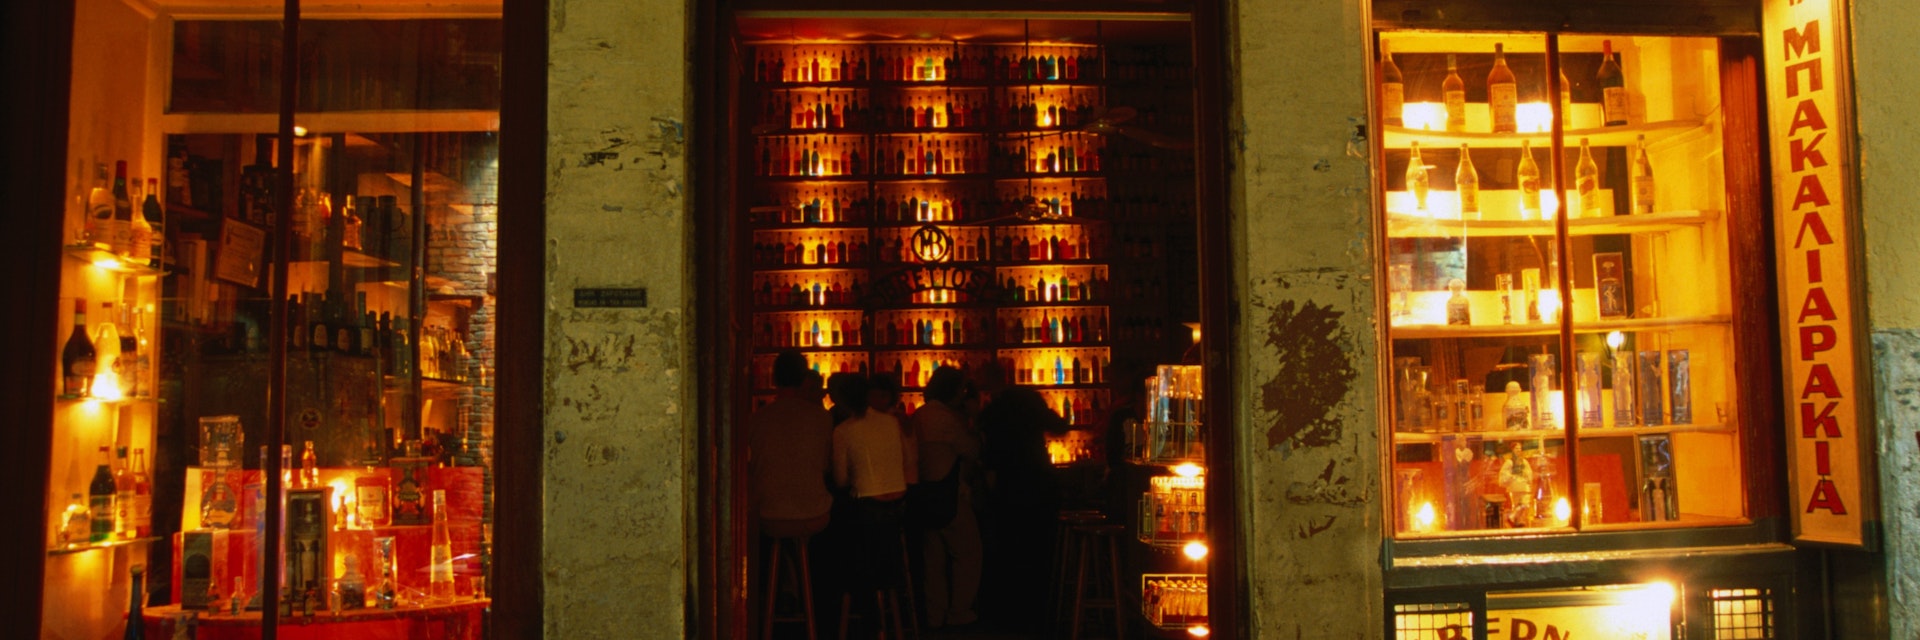 Brettos Bar in Plaka has brewed their own spitits for over 100 years.